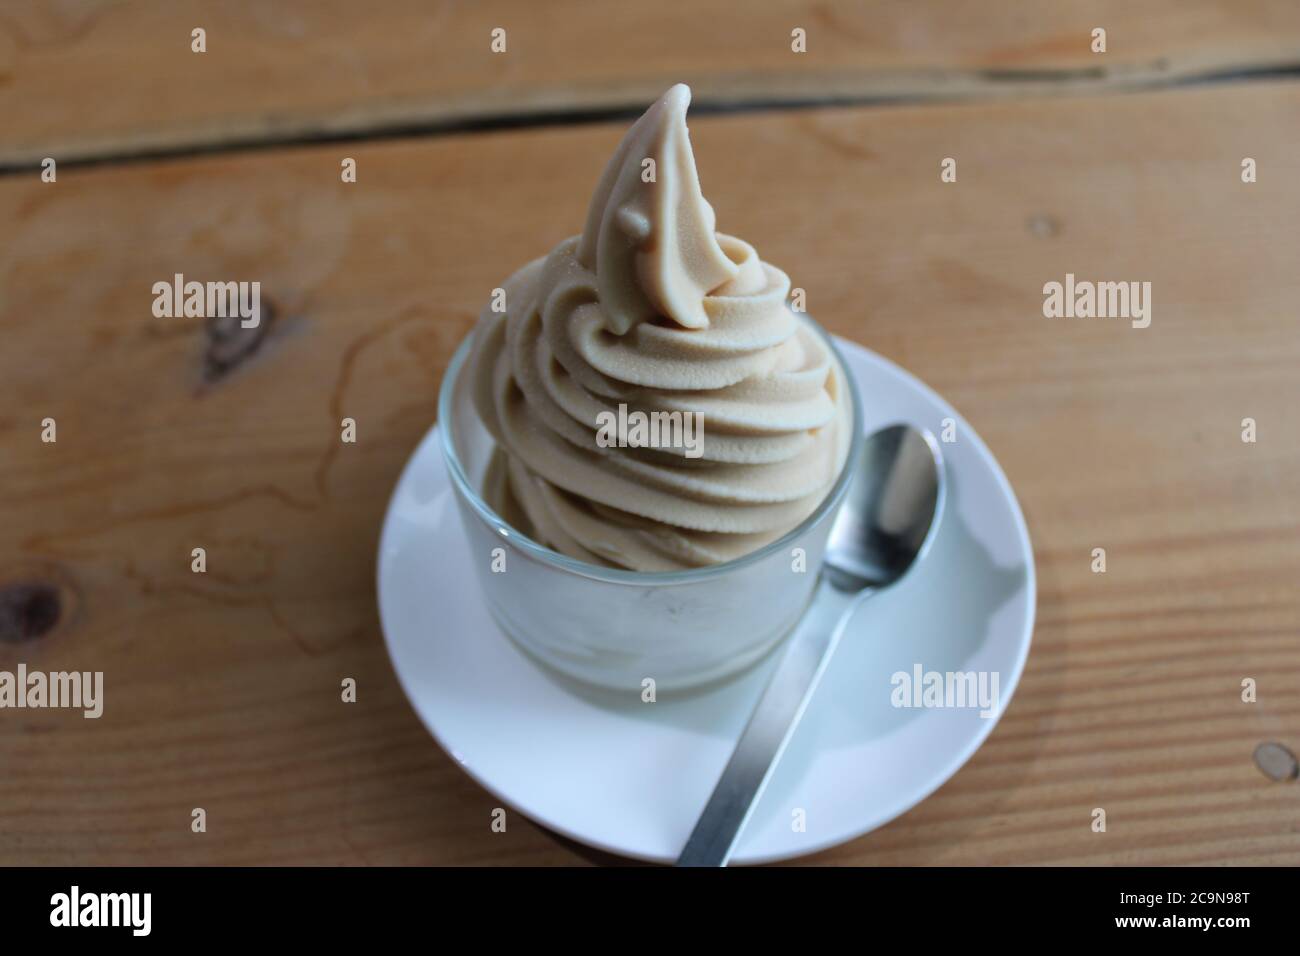 Goat's milk soft serve ice cream in a glass dessert dish, with a silver spoon Stock Photo